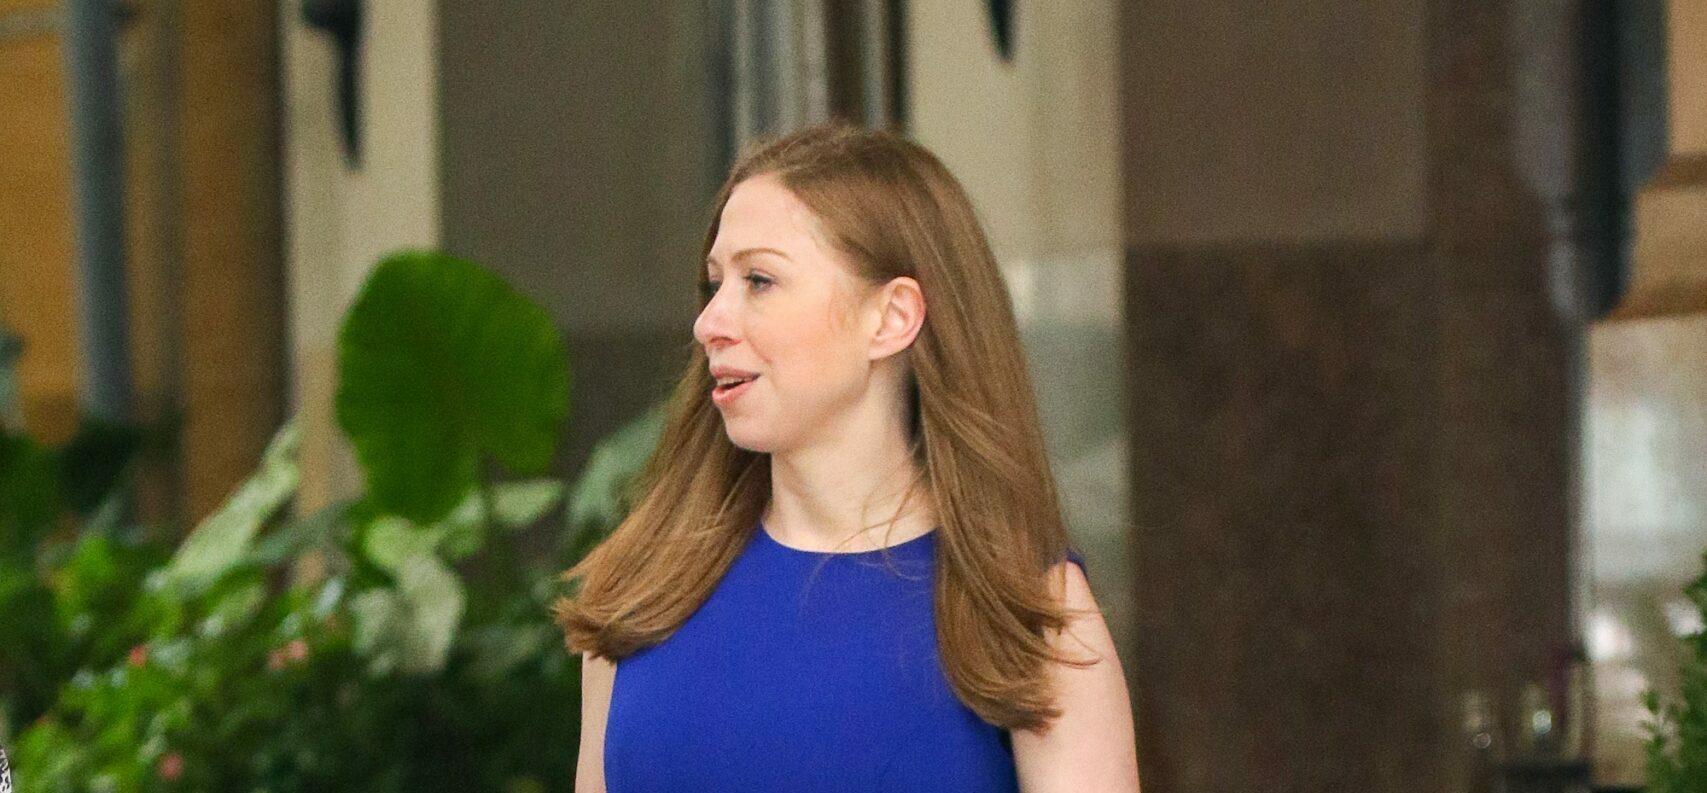 Chelsea Clinton seen leaving her apartment building in NYC